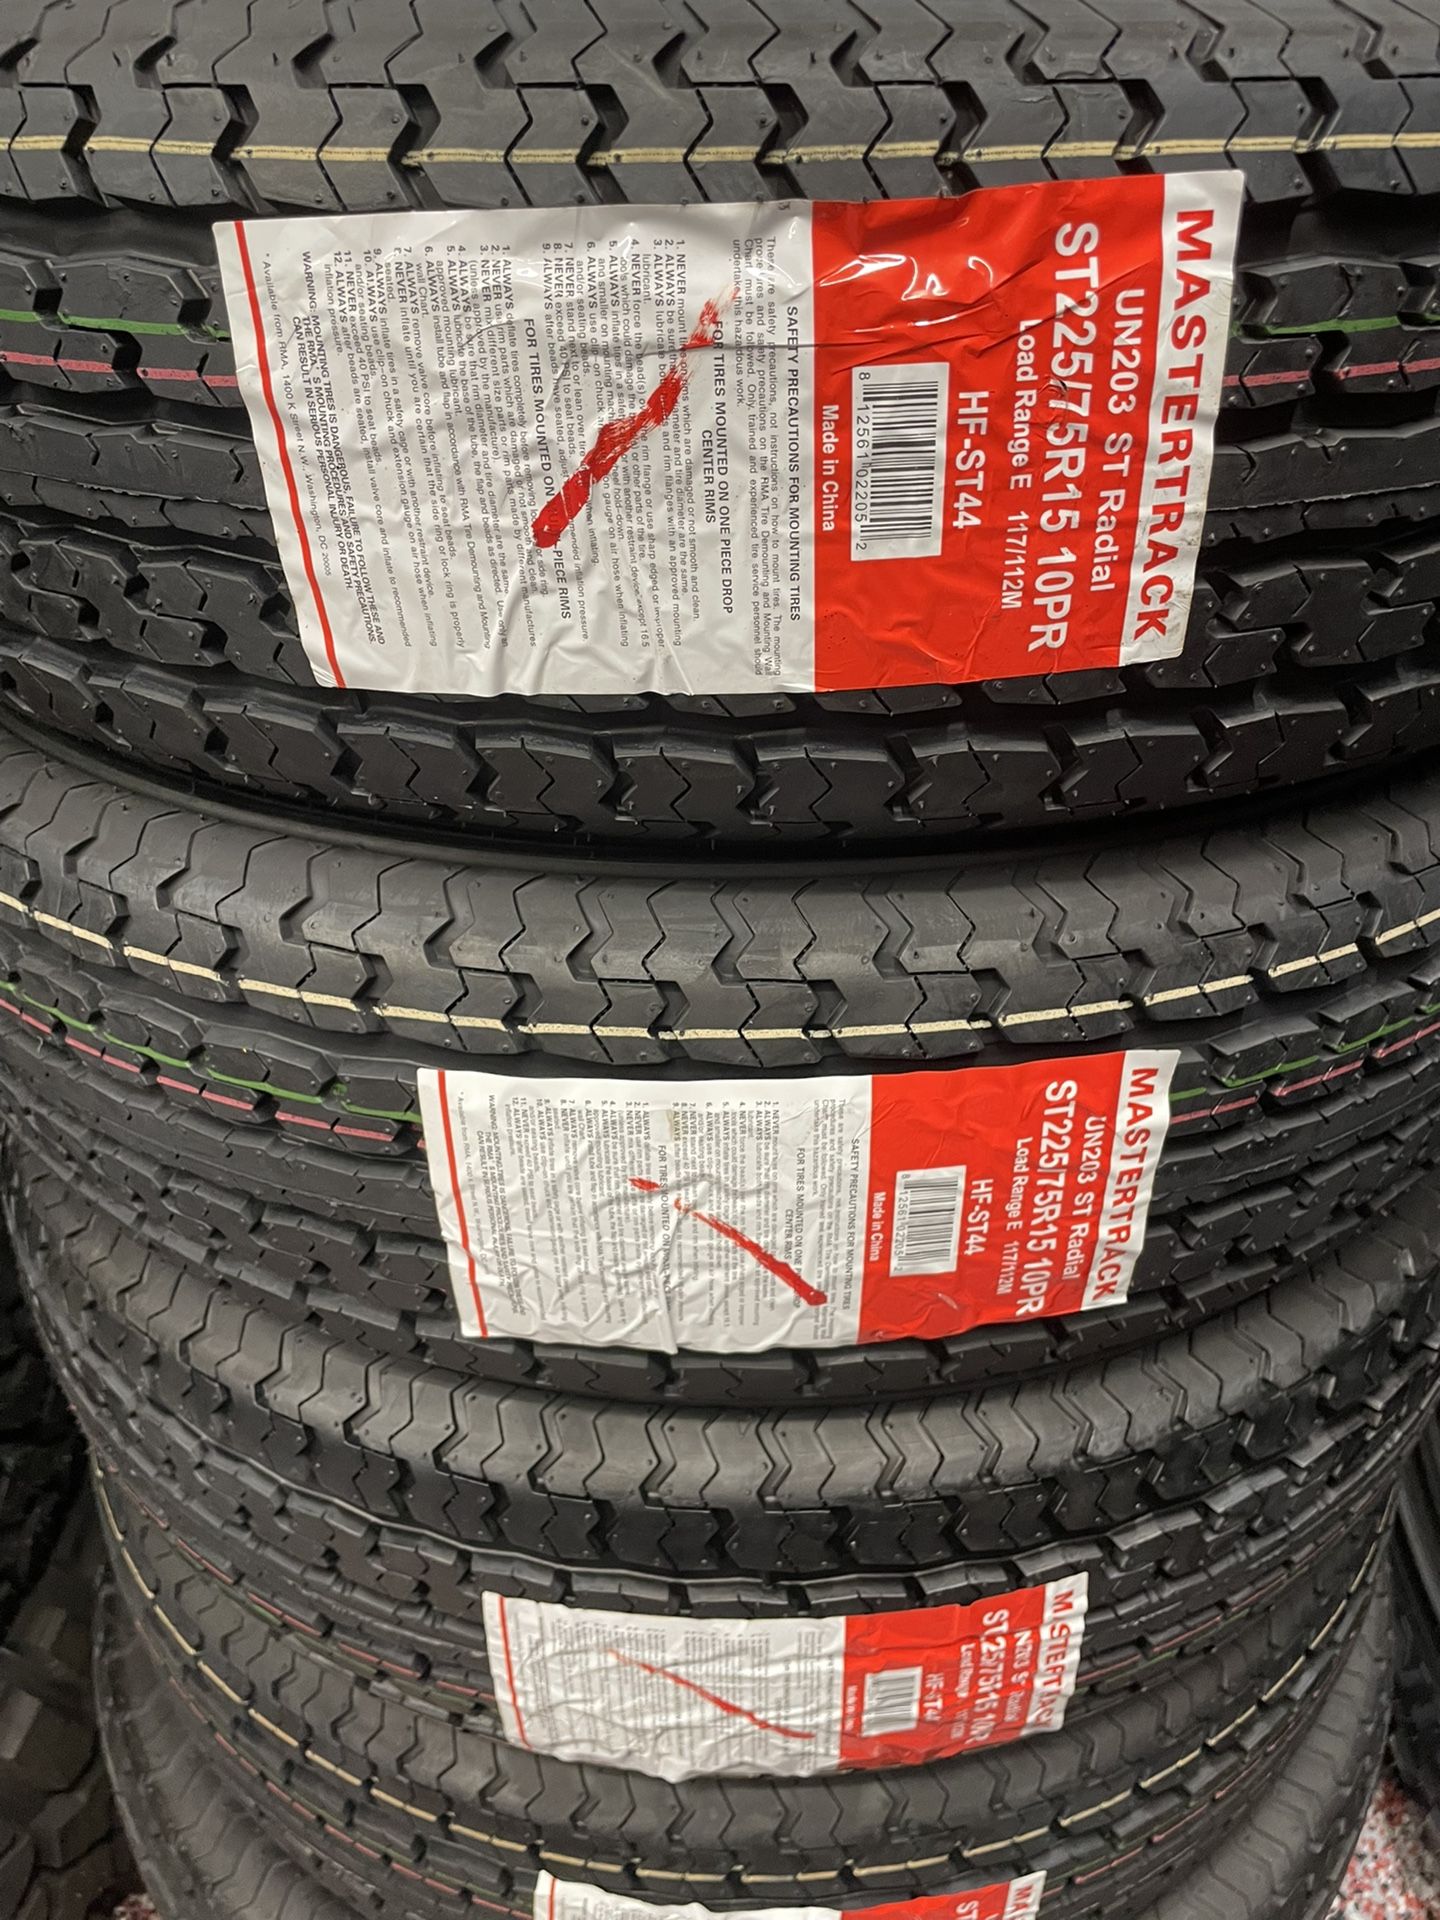 MASTERTRACK Trailer tires ST225/75R15 $94 each new 10 ply trailer tires ST 225/75/15 10 PLY 225/75R/15 10ply